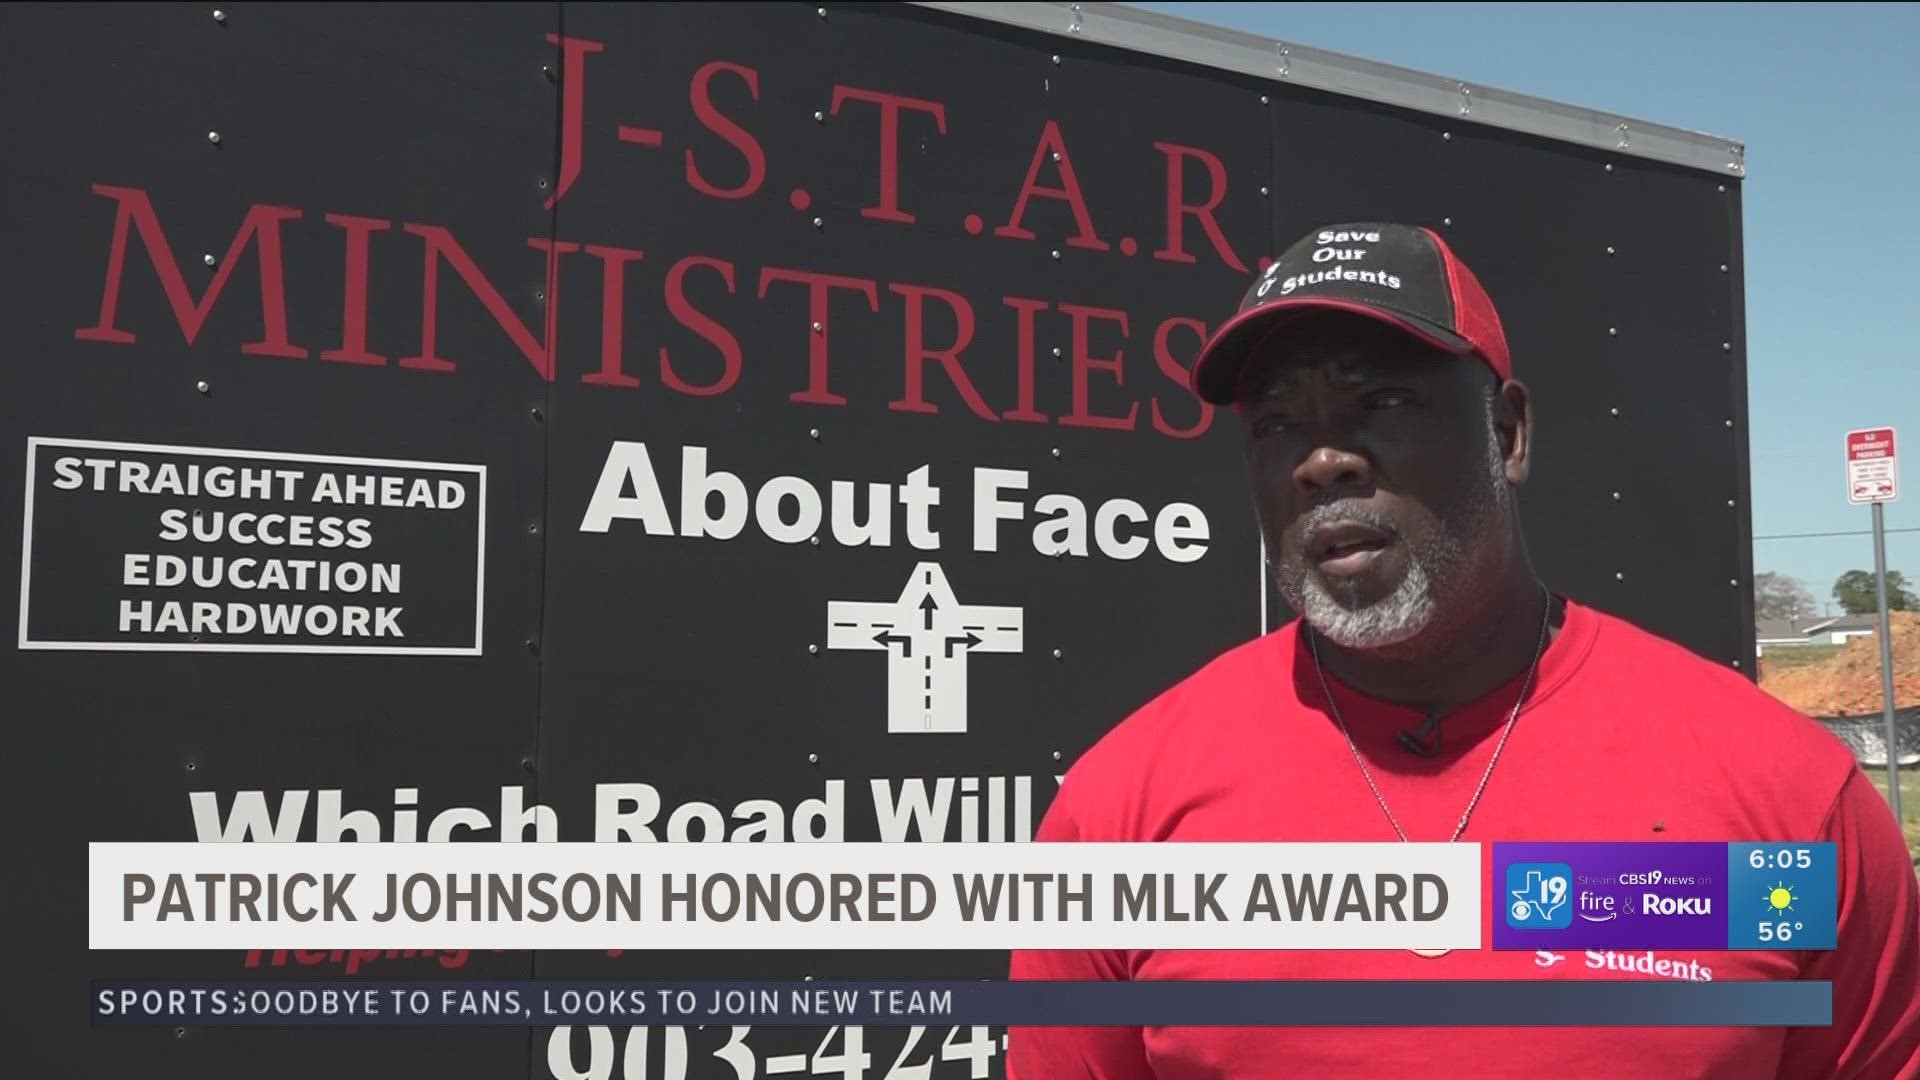 Patrick Johnson of JSTAR Ministries is being honored with the Rev. Dr. Martin Luther King Humanitarian Award in Longview